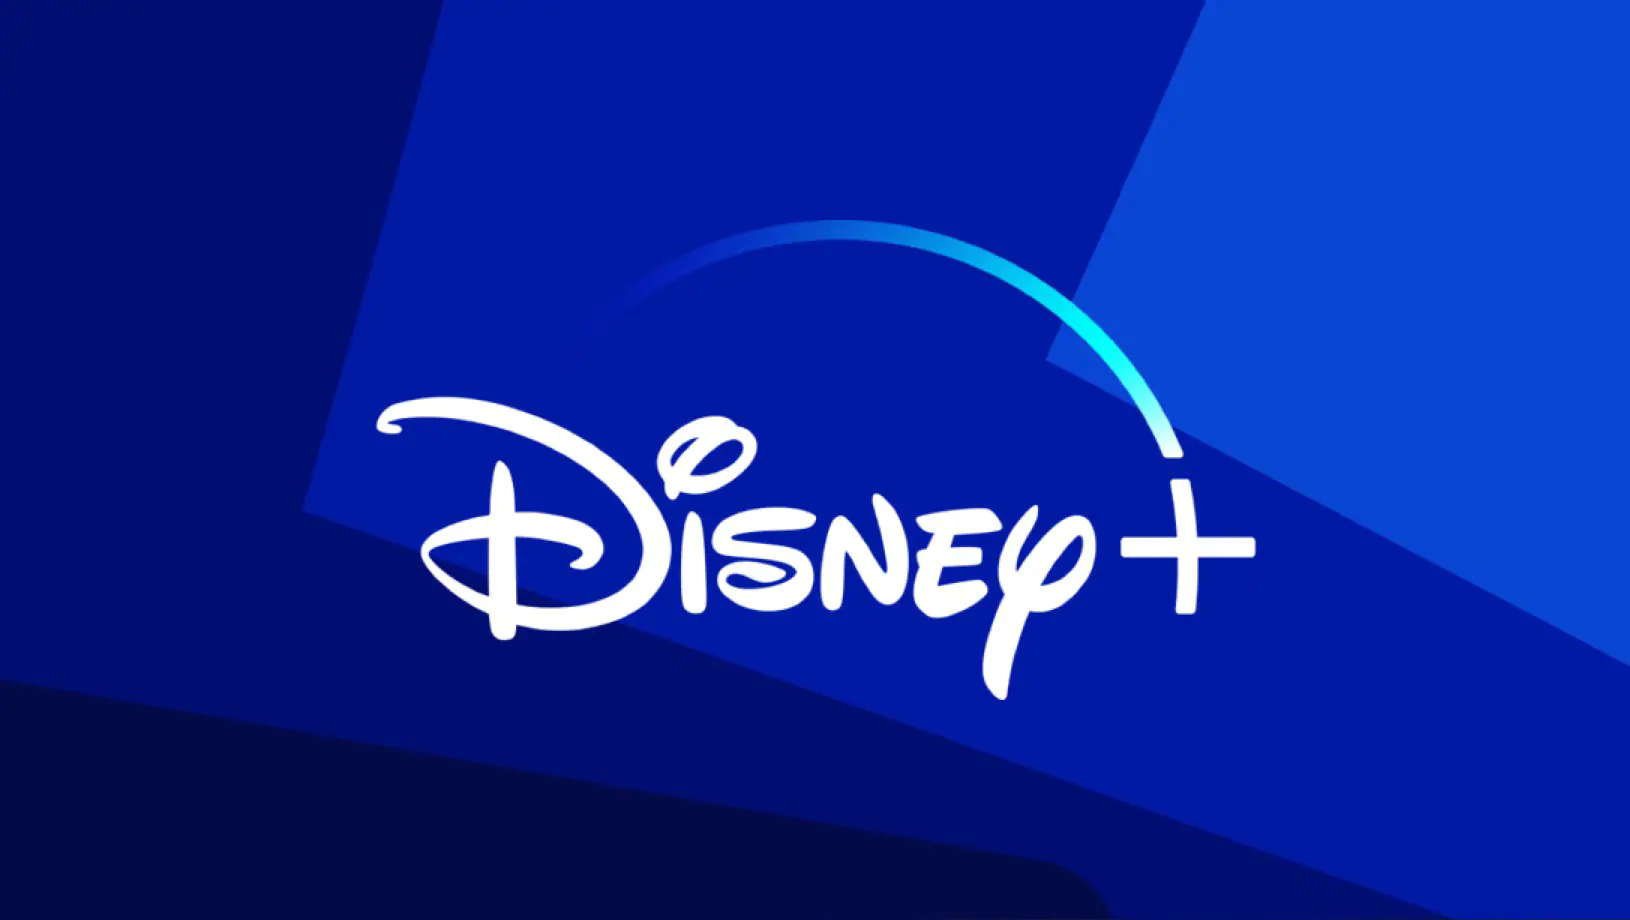 Disney Shares Gained Value!